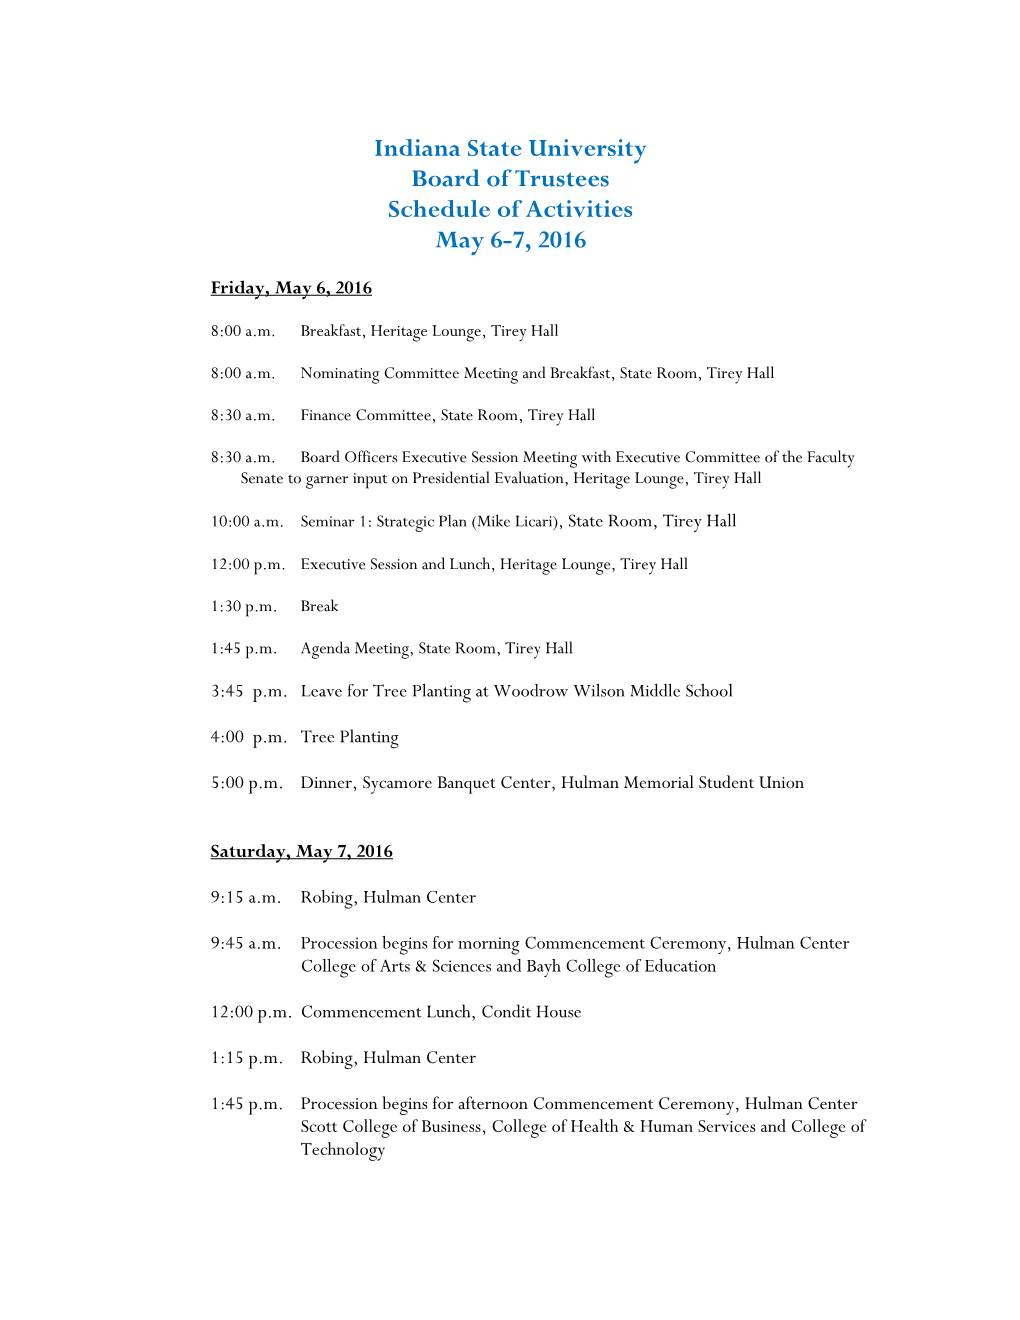 Indiana State University Board of Trustees Schedule of Activities May 6-7, 2016